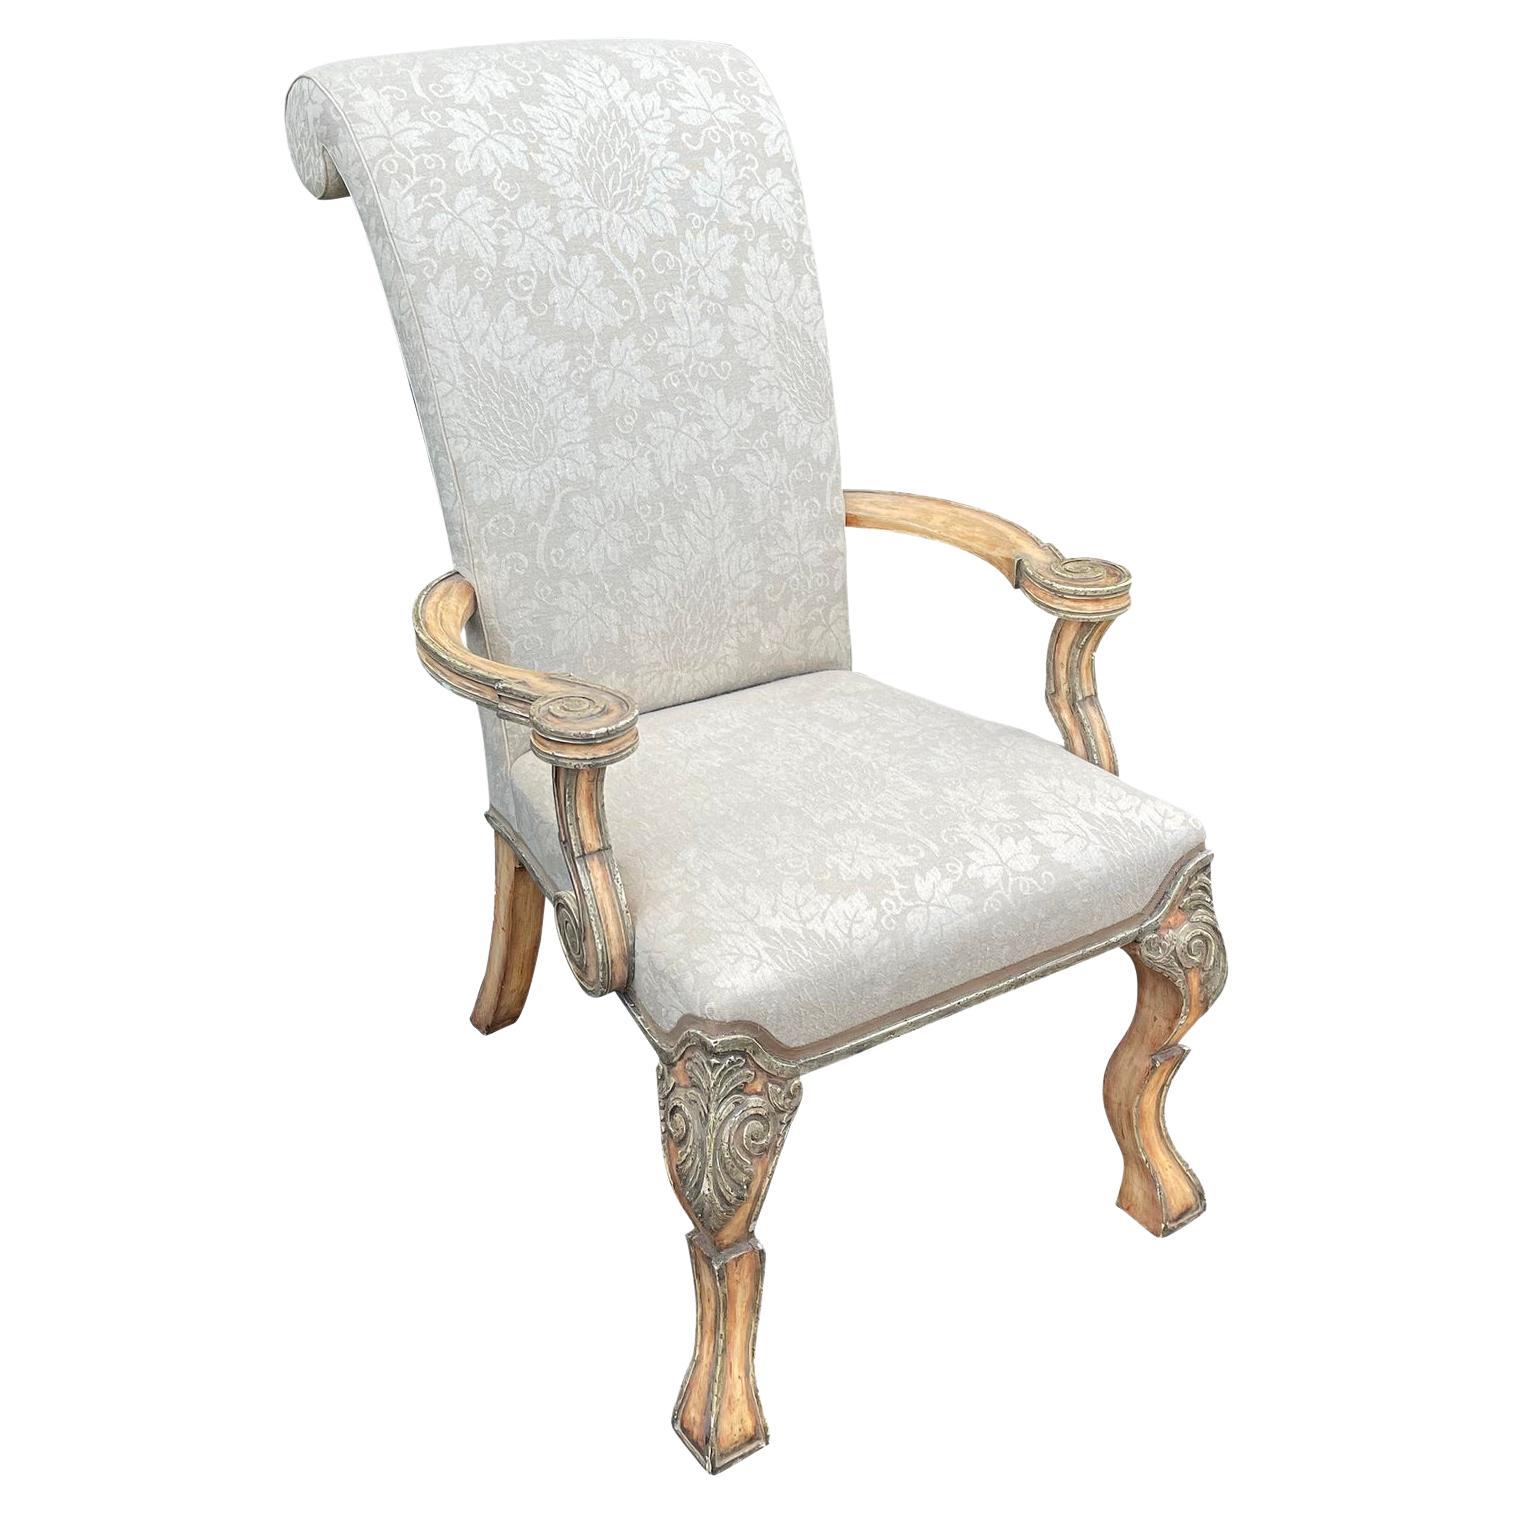 Minton-Spidell 18th Century Style Carved Italian Armchair For Sale